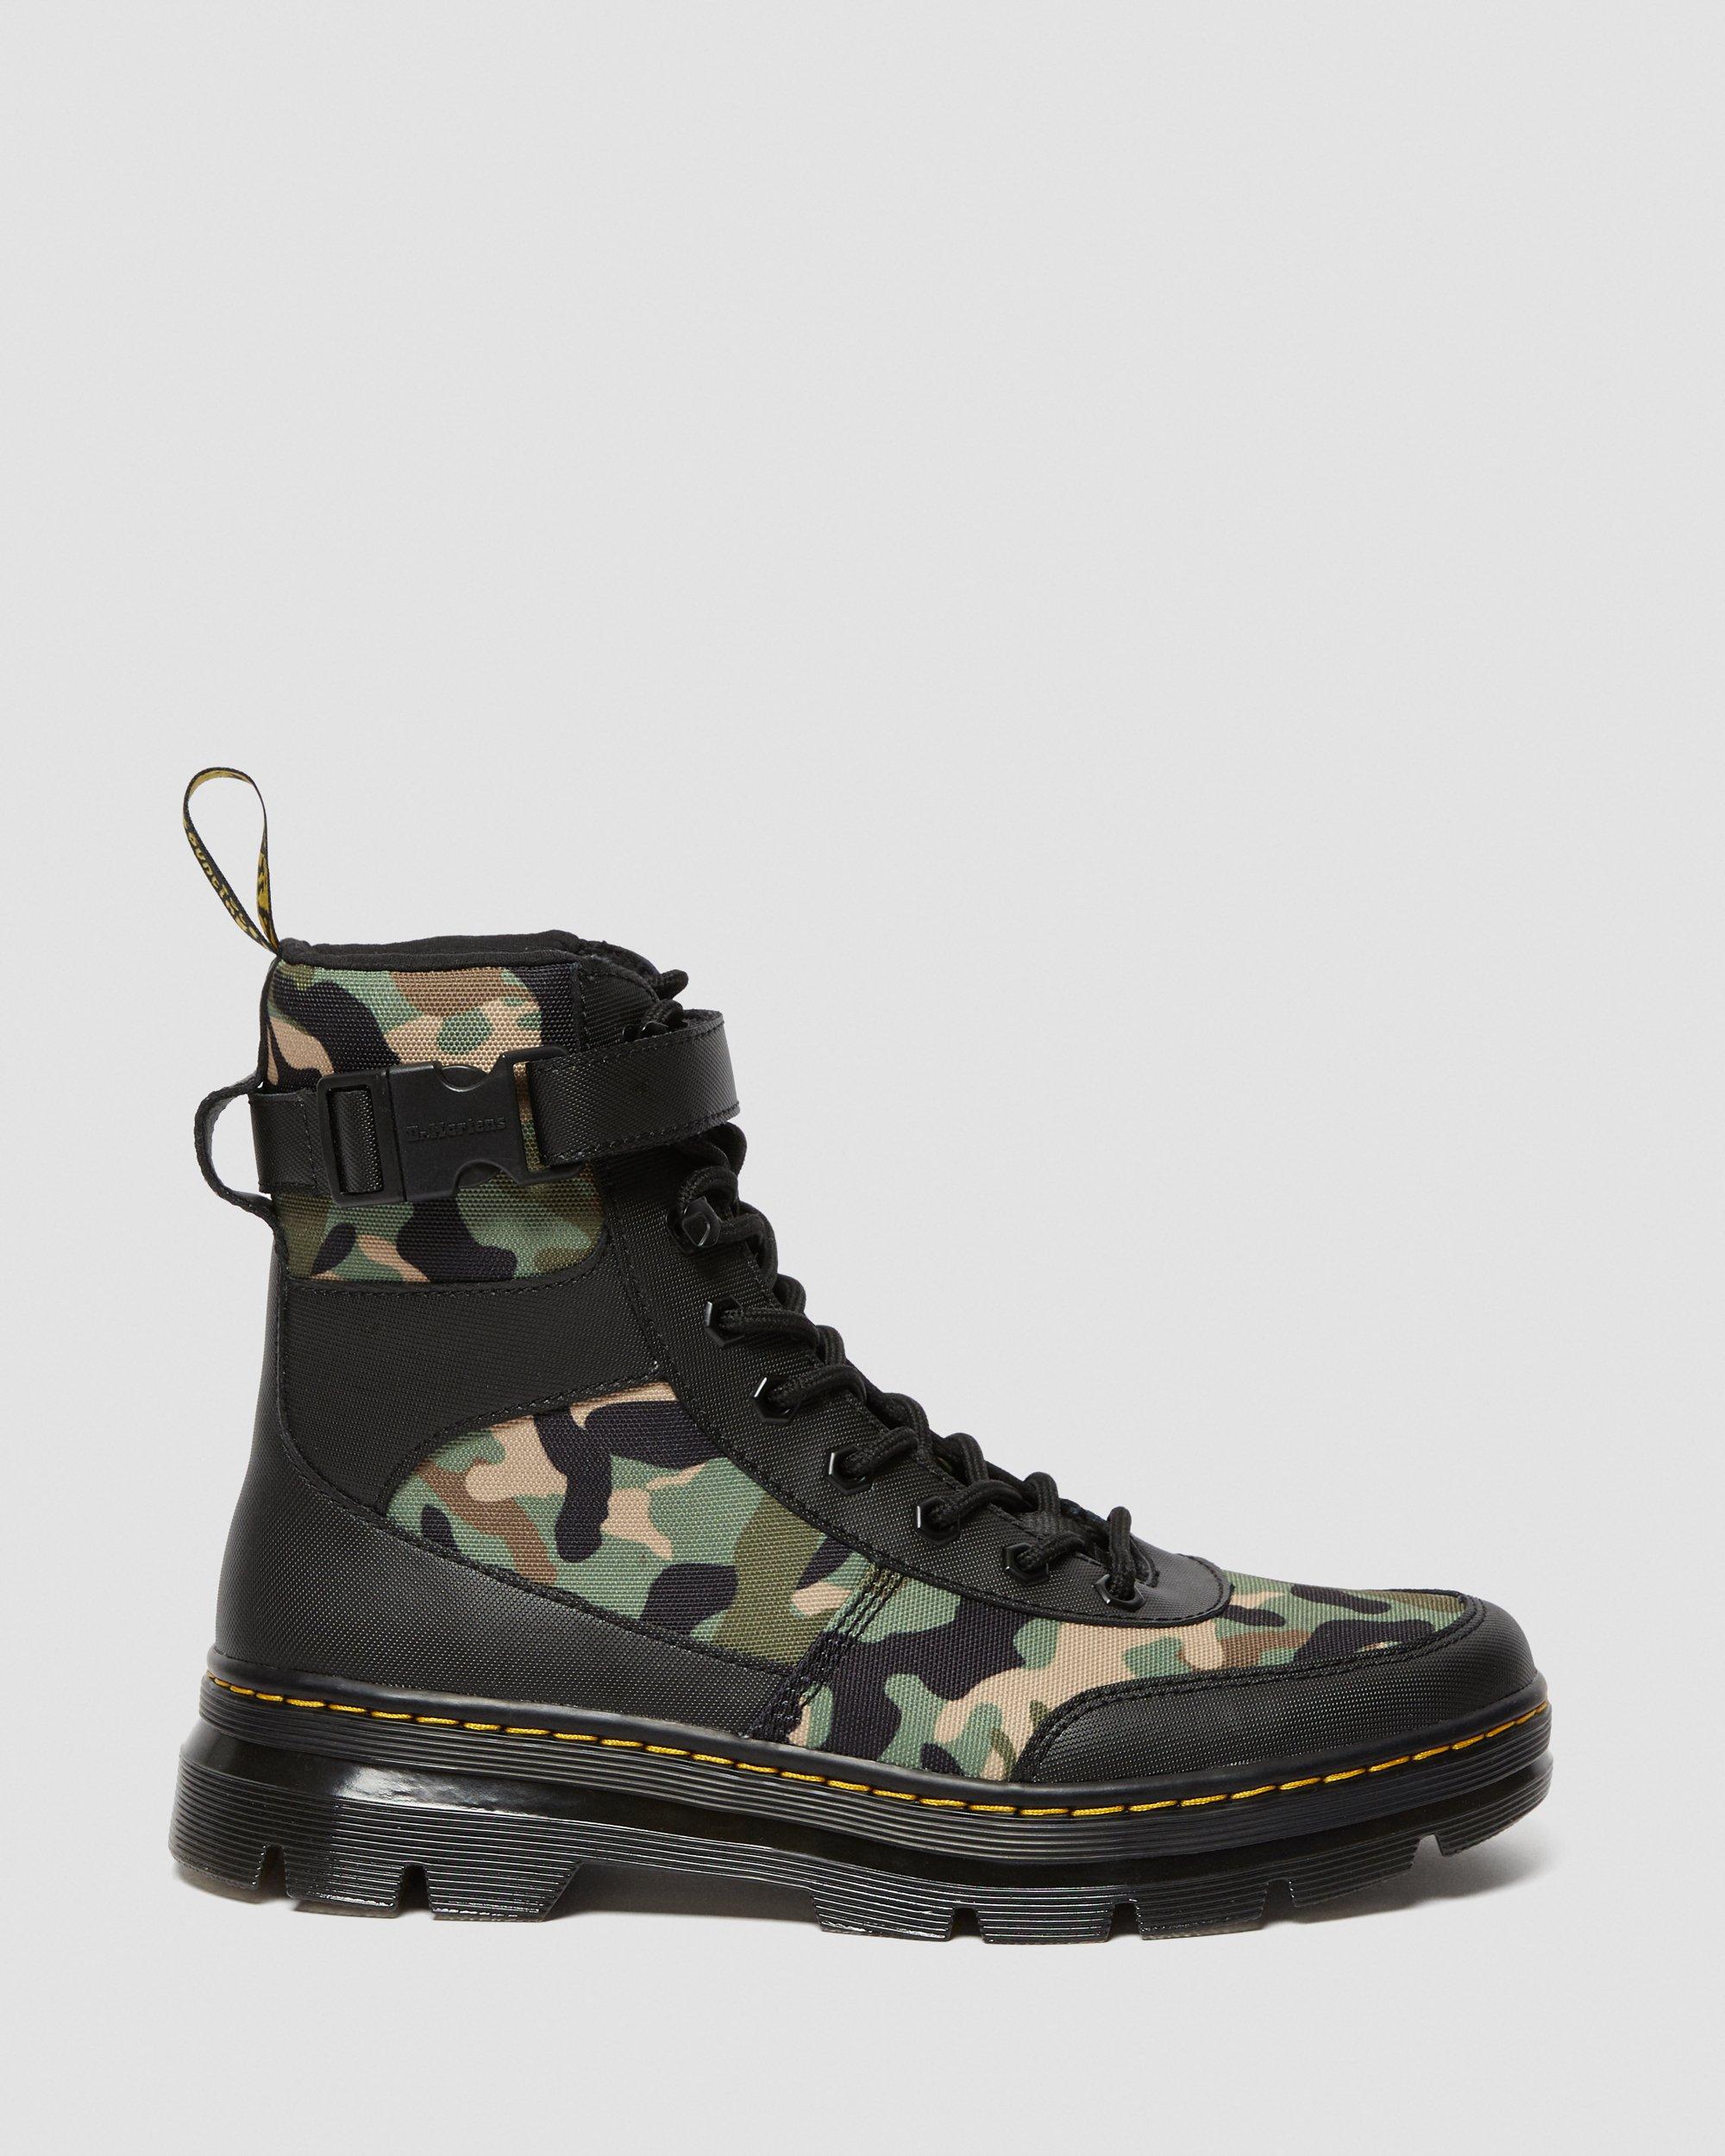 Combs Tech Camo Casual Boots in Black | Dr. Martens